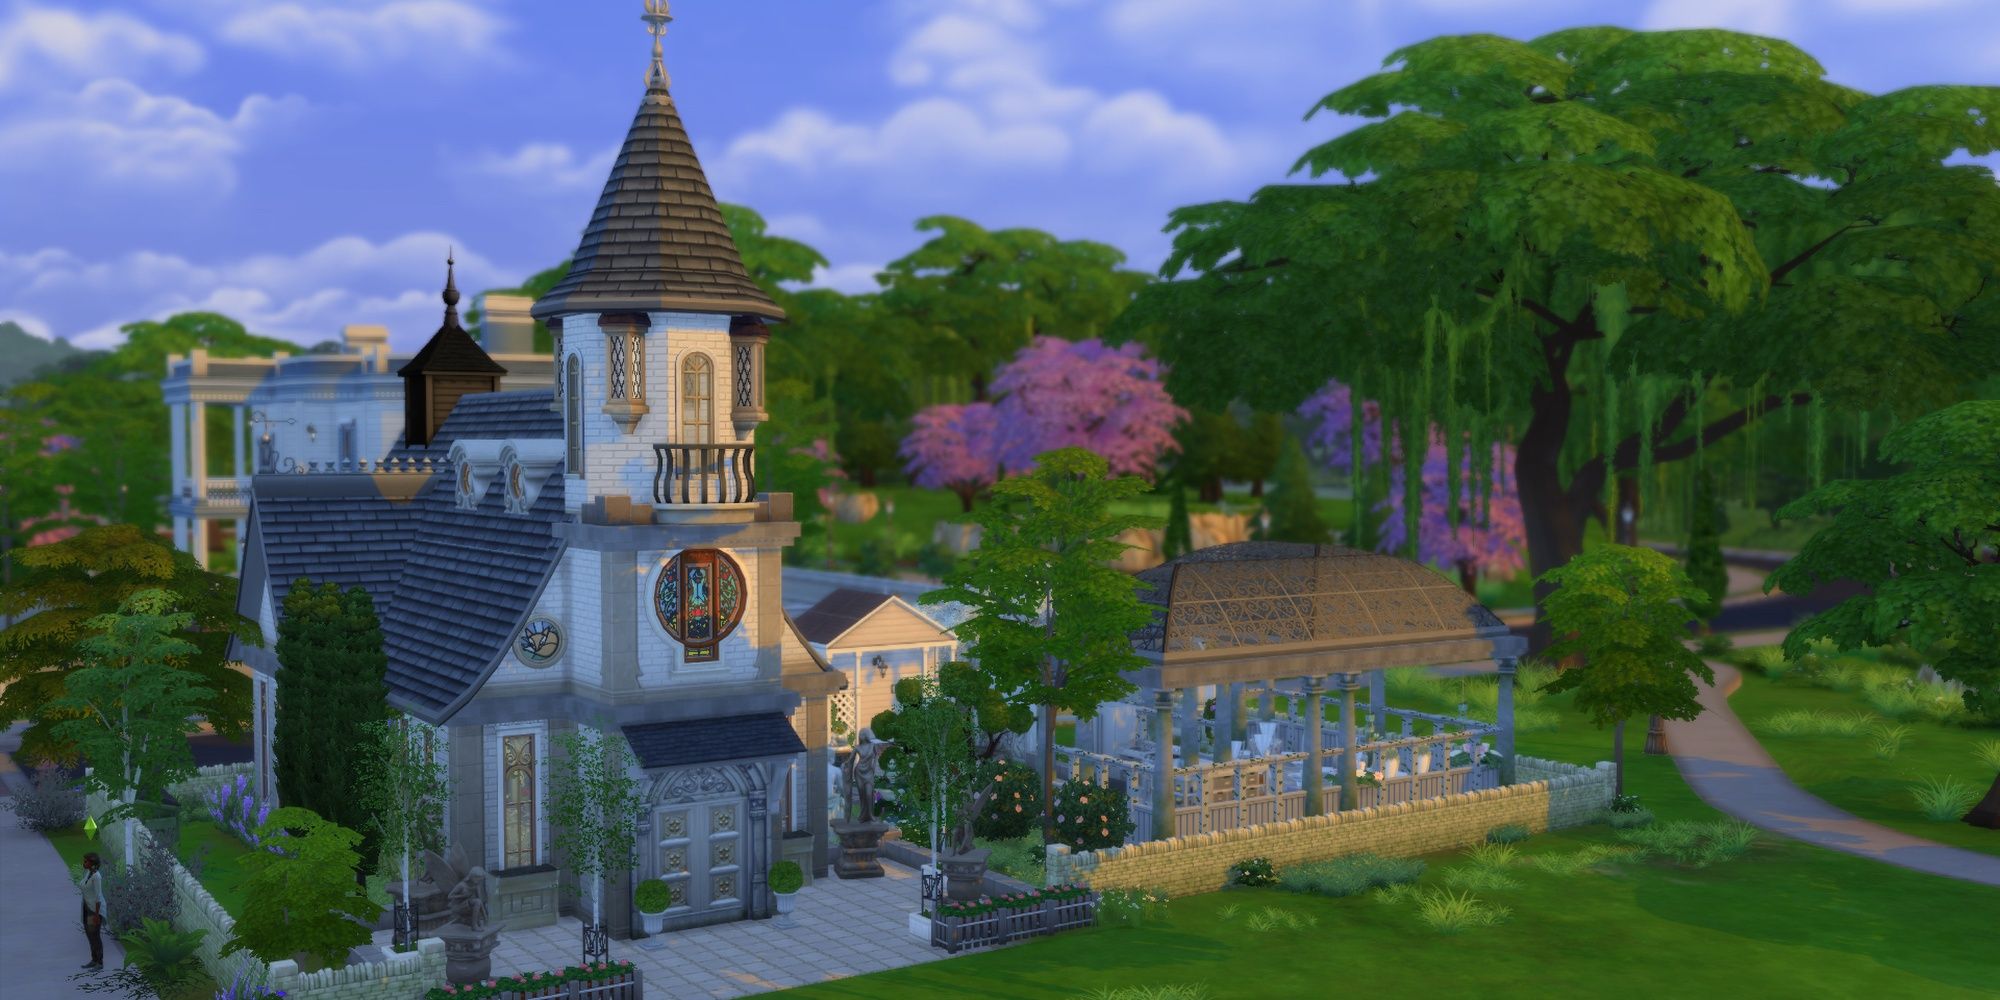 An old fashioned stone church from The Sims 4.